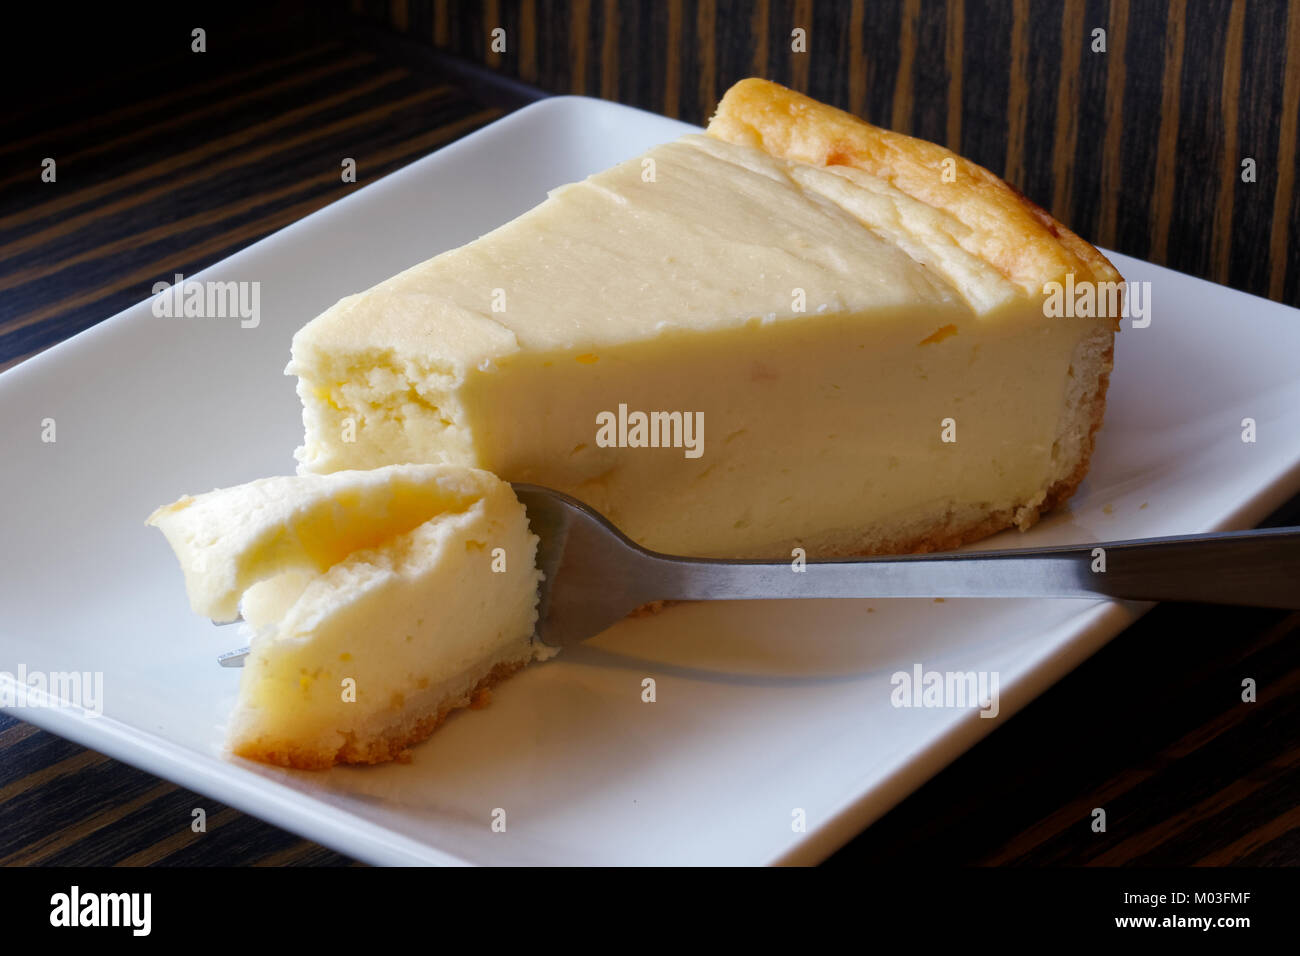 Plain baked cheesecake with cake on fork on white ceramic plate. Brown background. Stock Photo